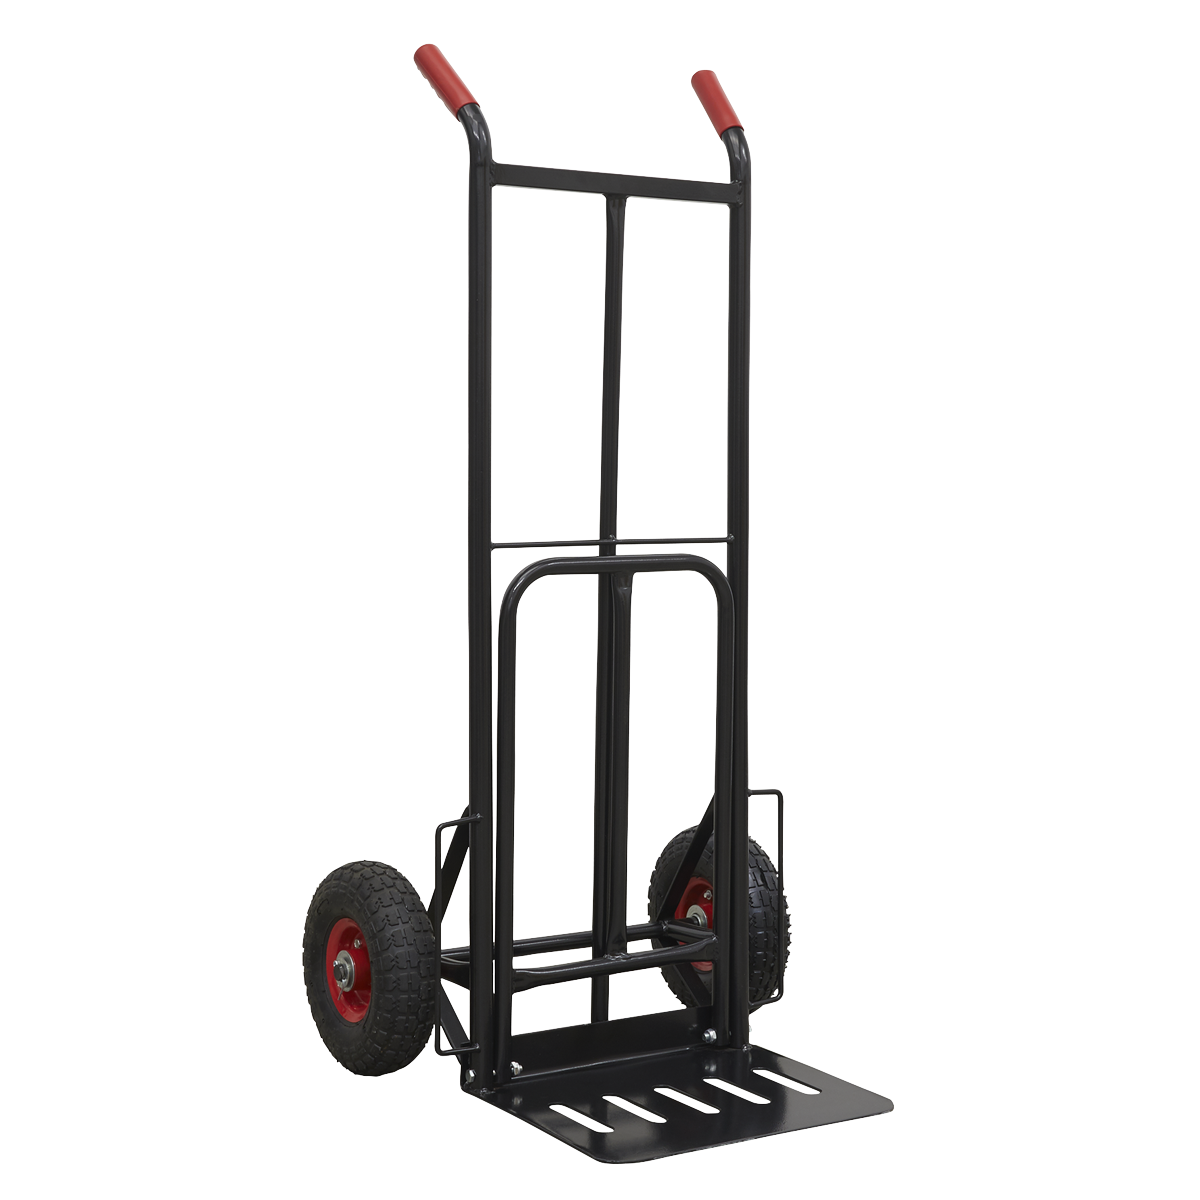 Sealey Heavy-Duty Sack Truck with PU Tyres 300kg Capacity